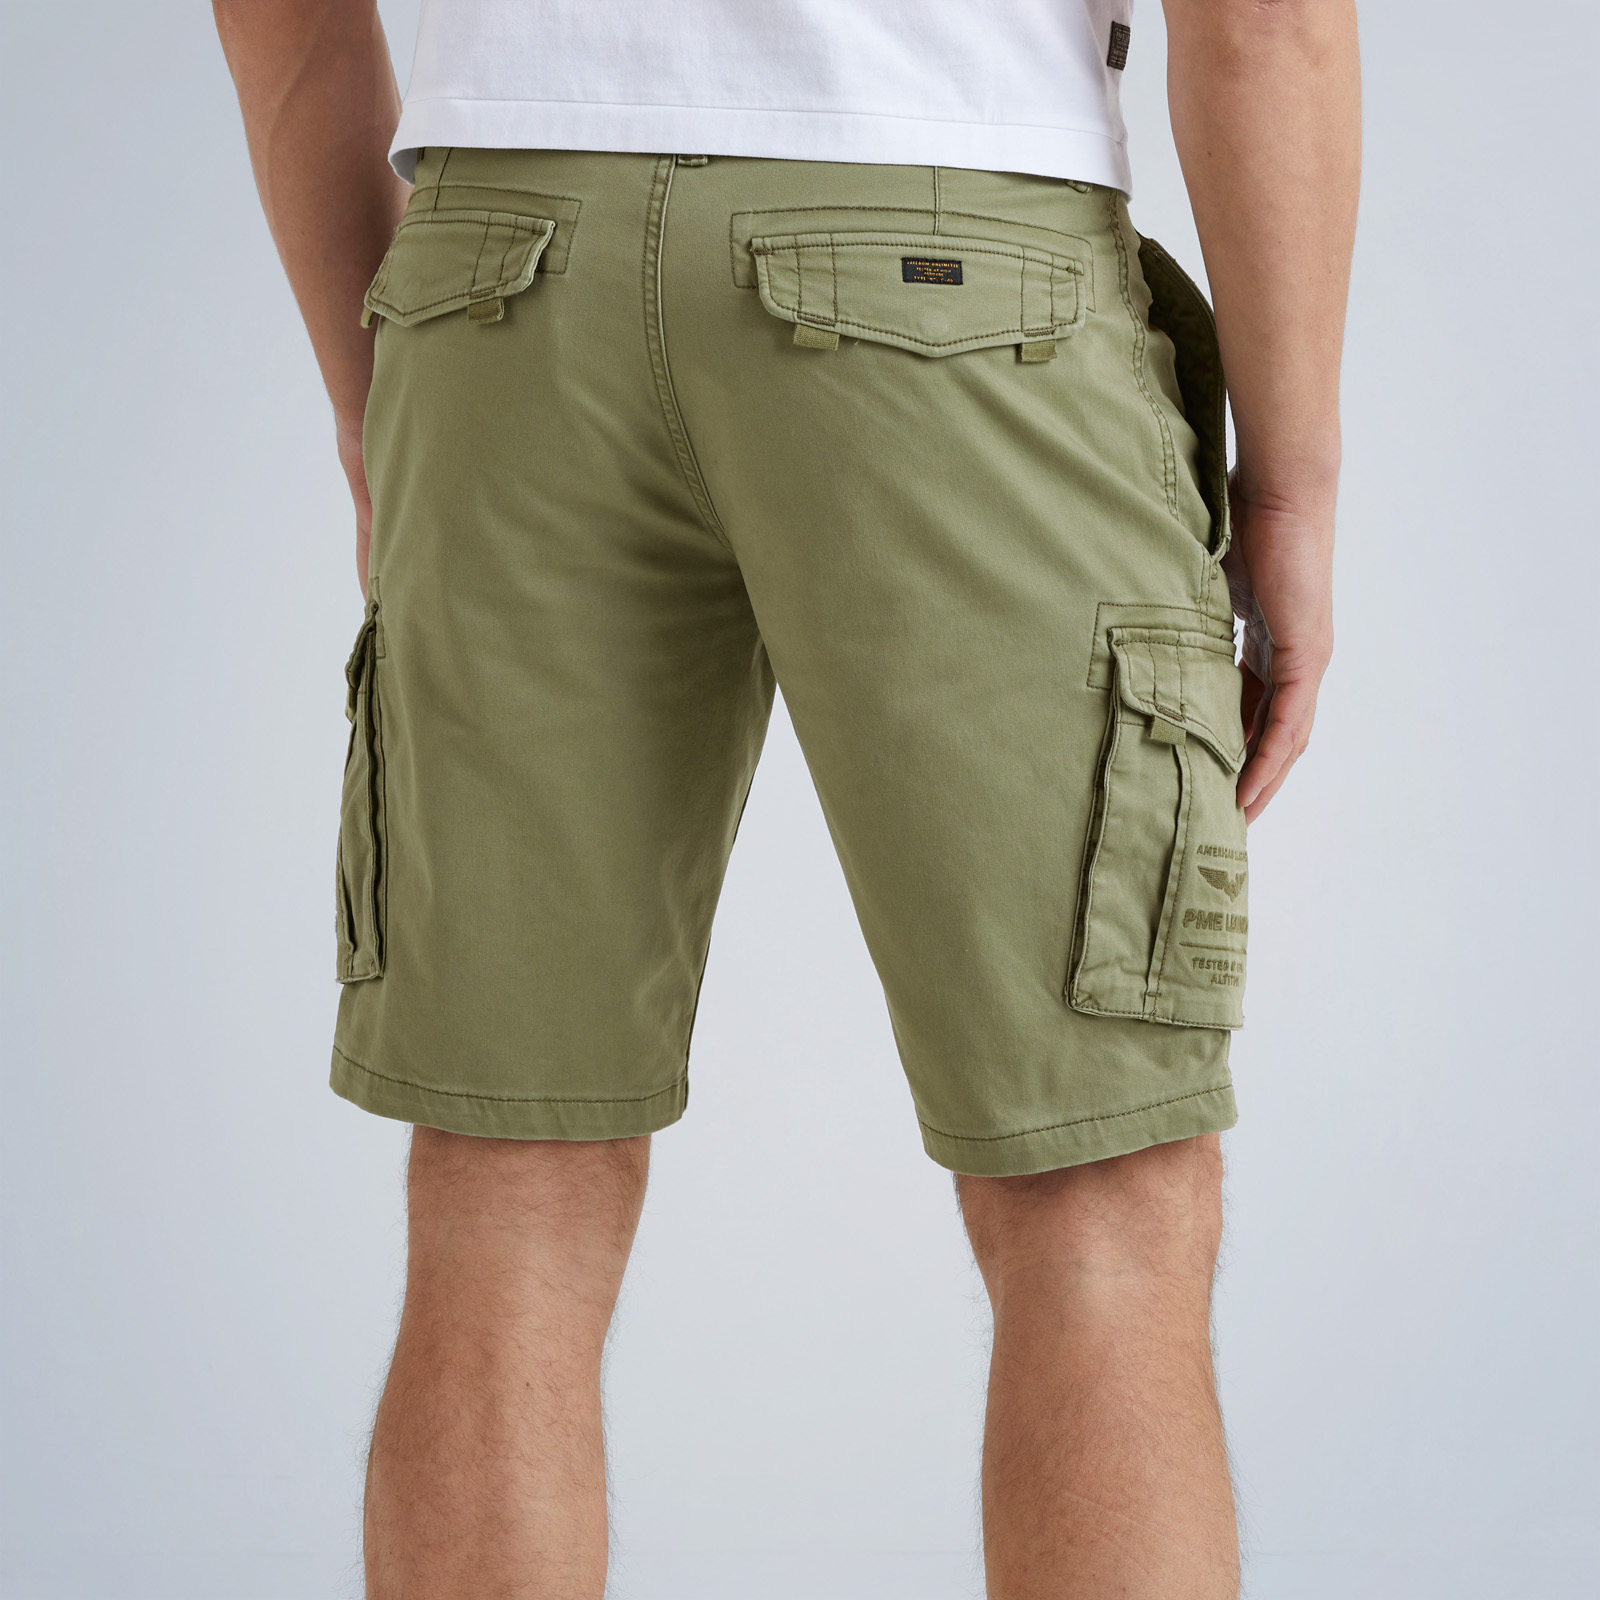 PME LEGEND | Stretch Twill Cargo Short | Free shipping and returns